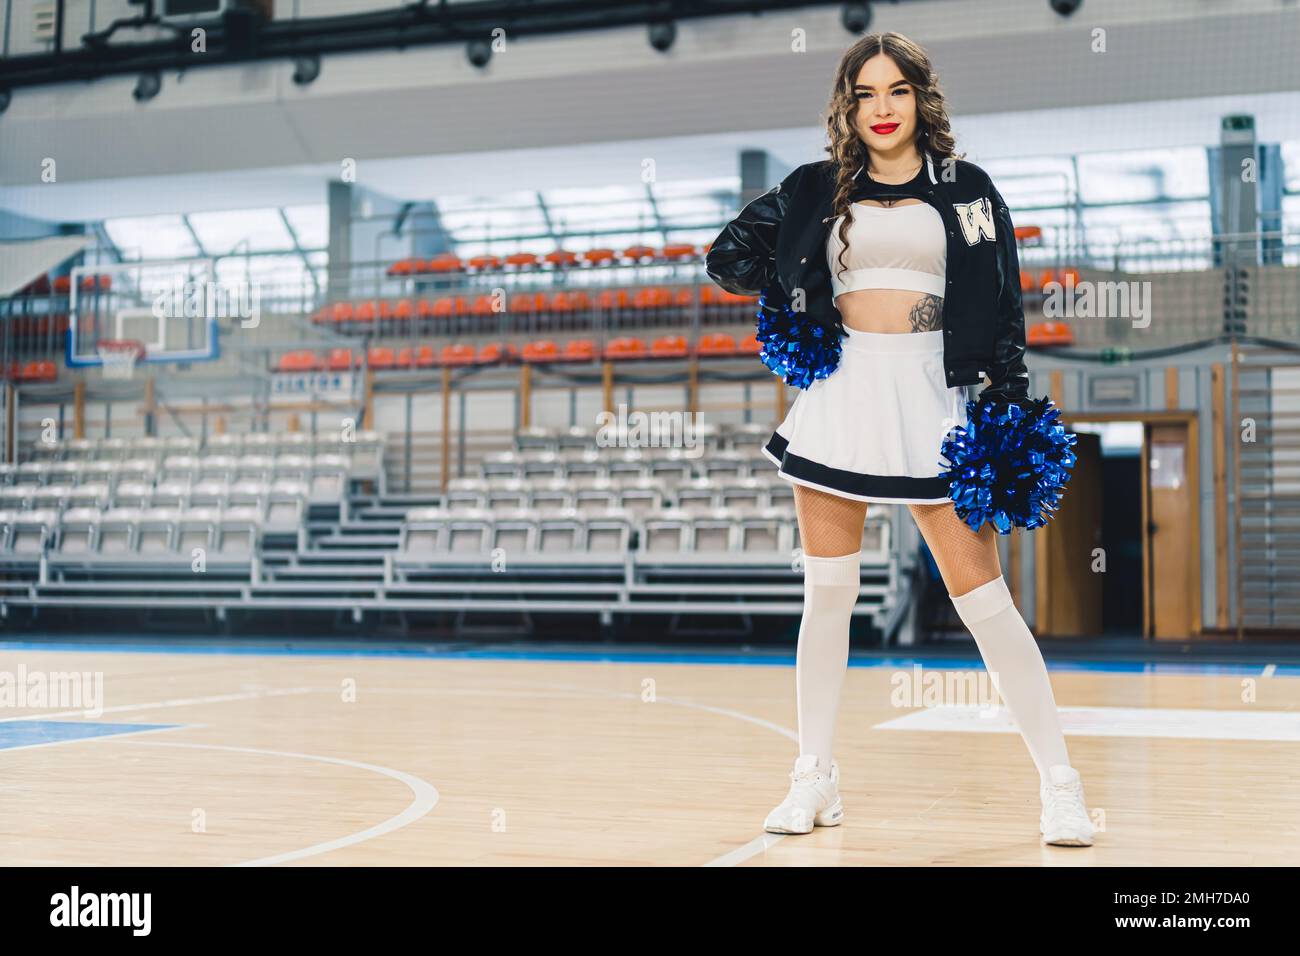 Full shot of a cheerleader in uniform with a jacket posing on basketball court. Sports hall's boxes blurred in the background. High quality photo Stock Photo